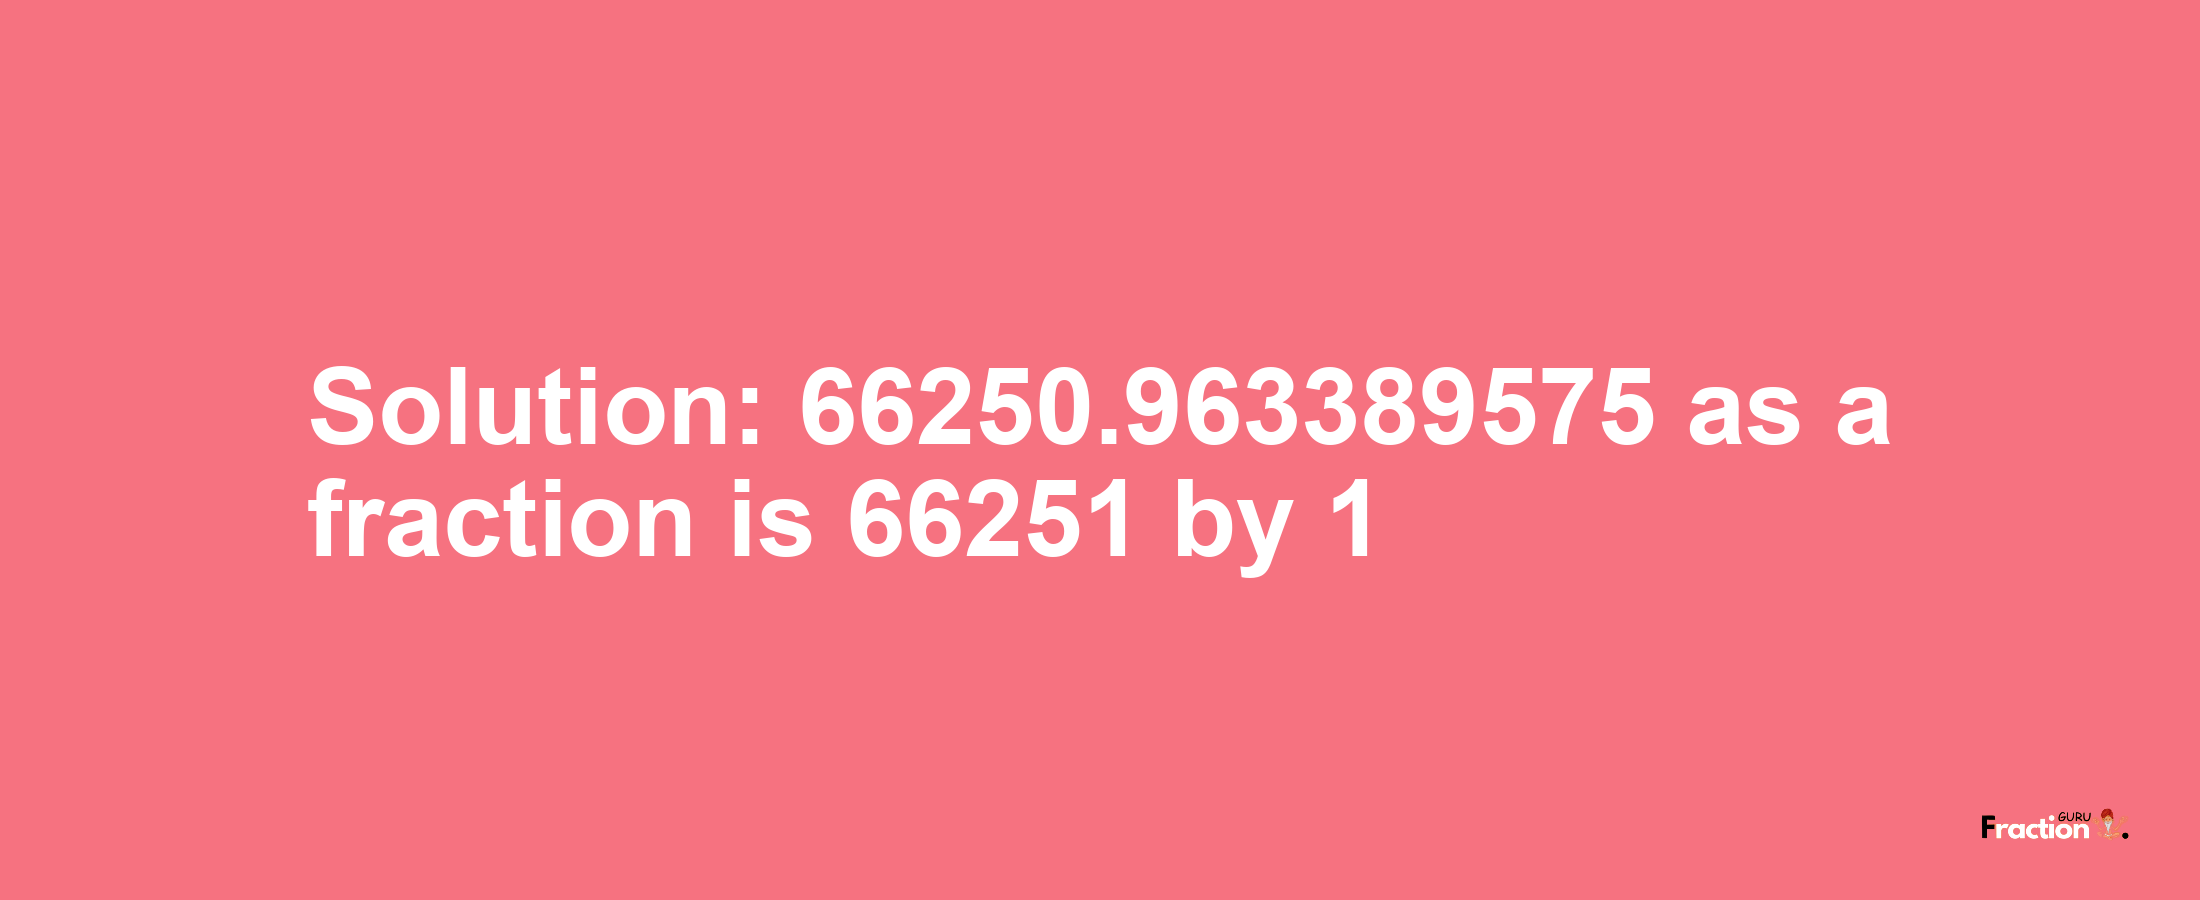 Solution:66250.963389575 as a fraction is 66251/1